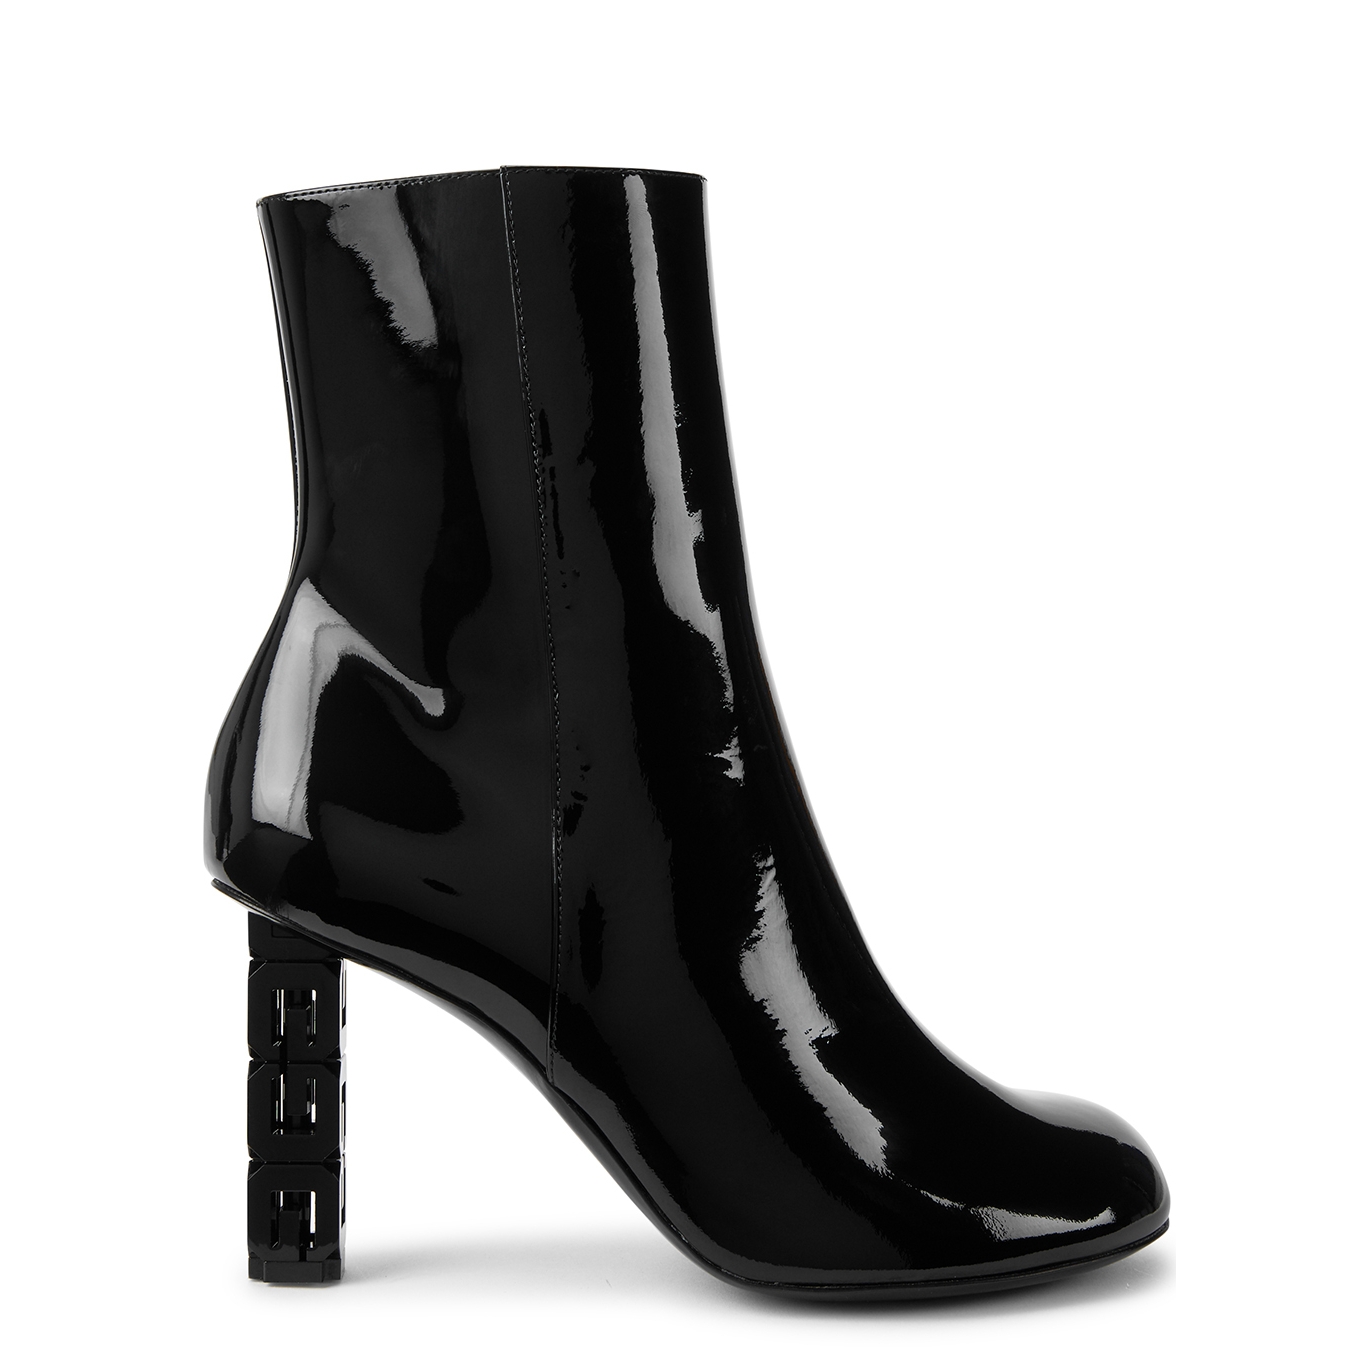 Givenchy G Cube 85 Patent Leather Ankle Boots